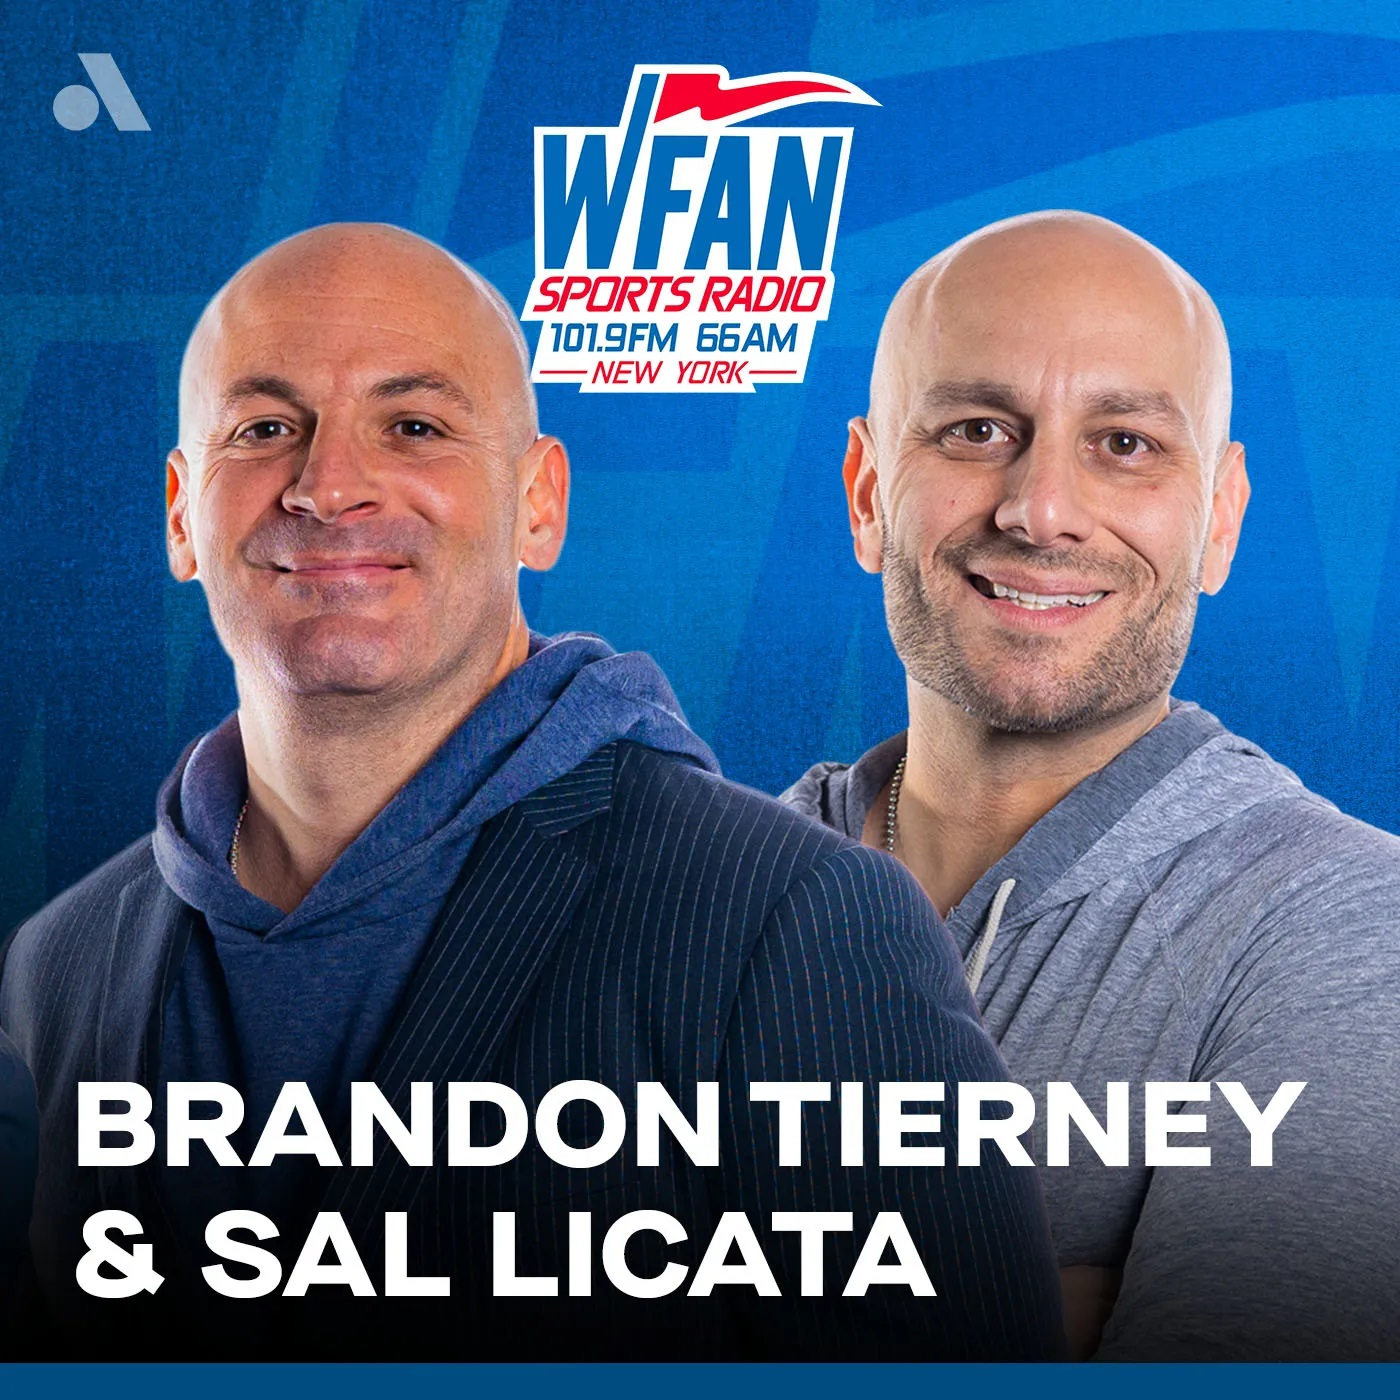 The Brandon Tierney and Sal Licata Show on X: Judge has stopped